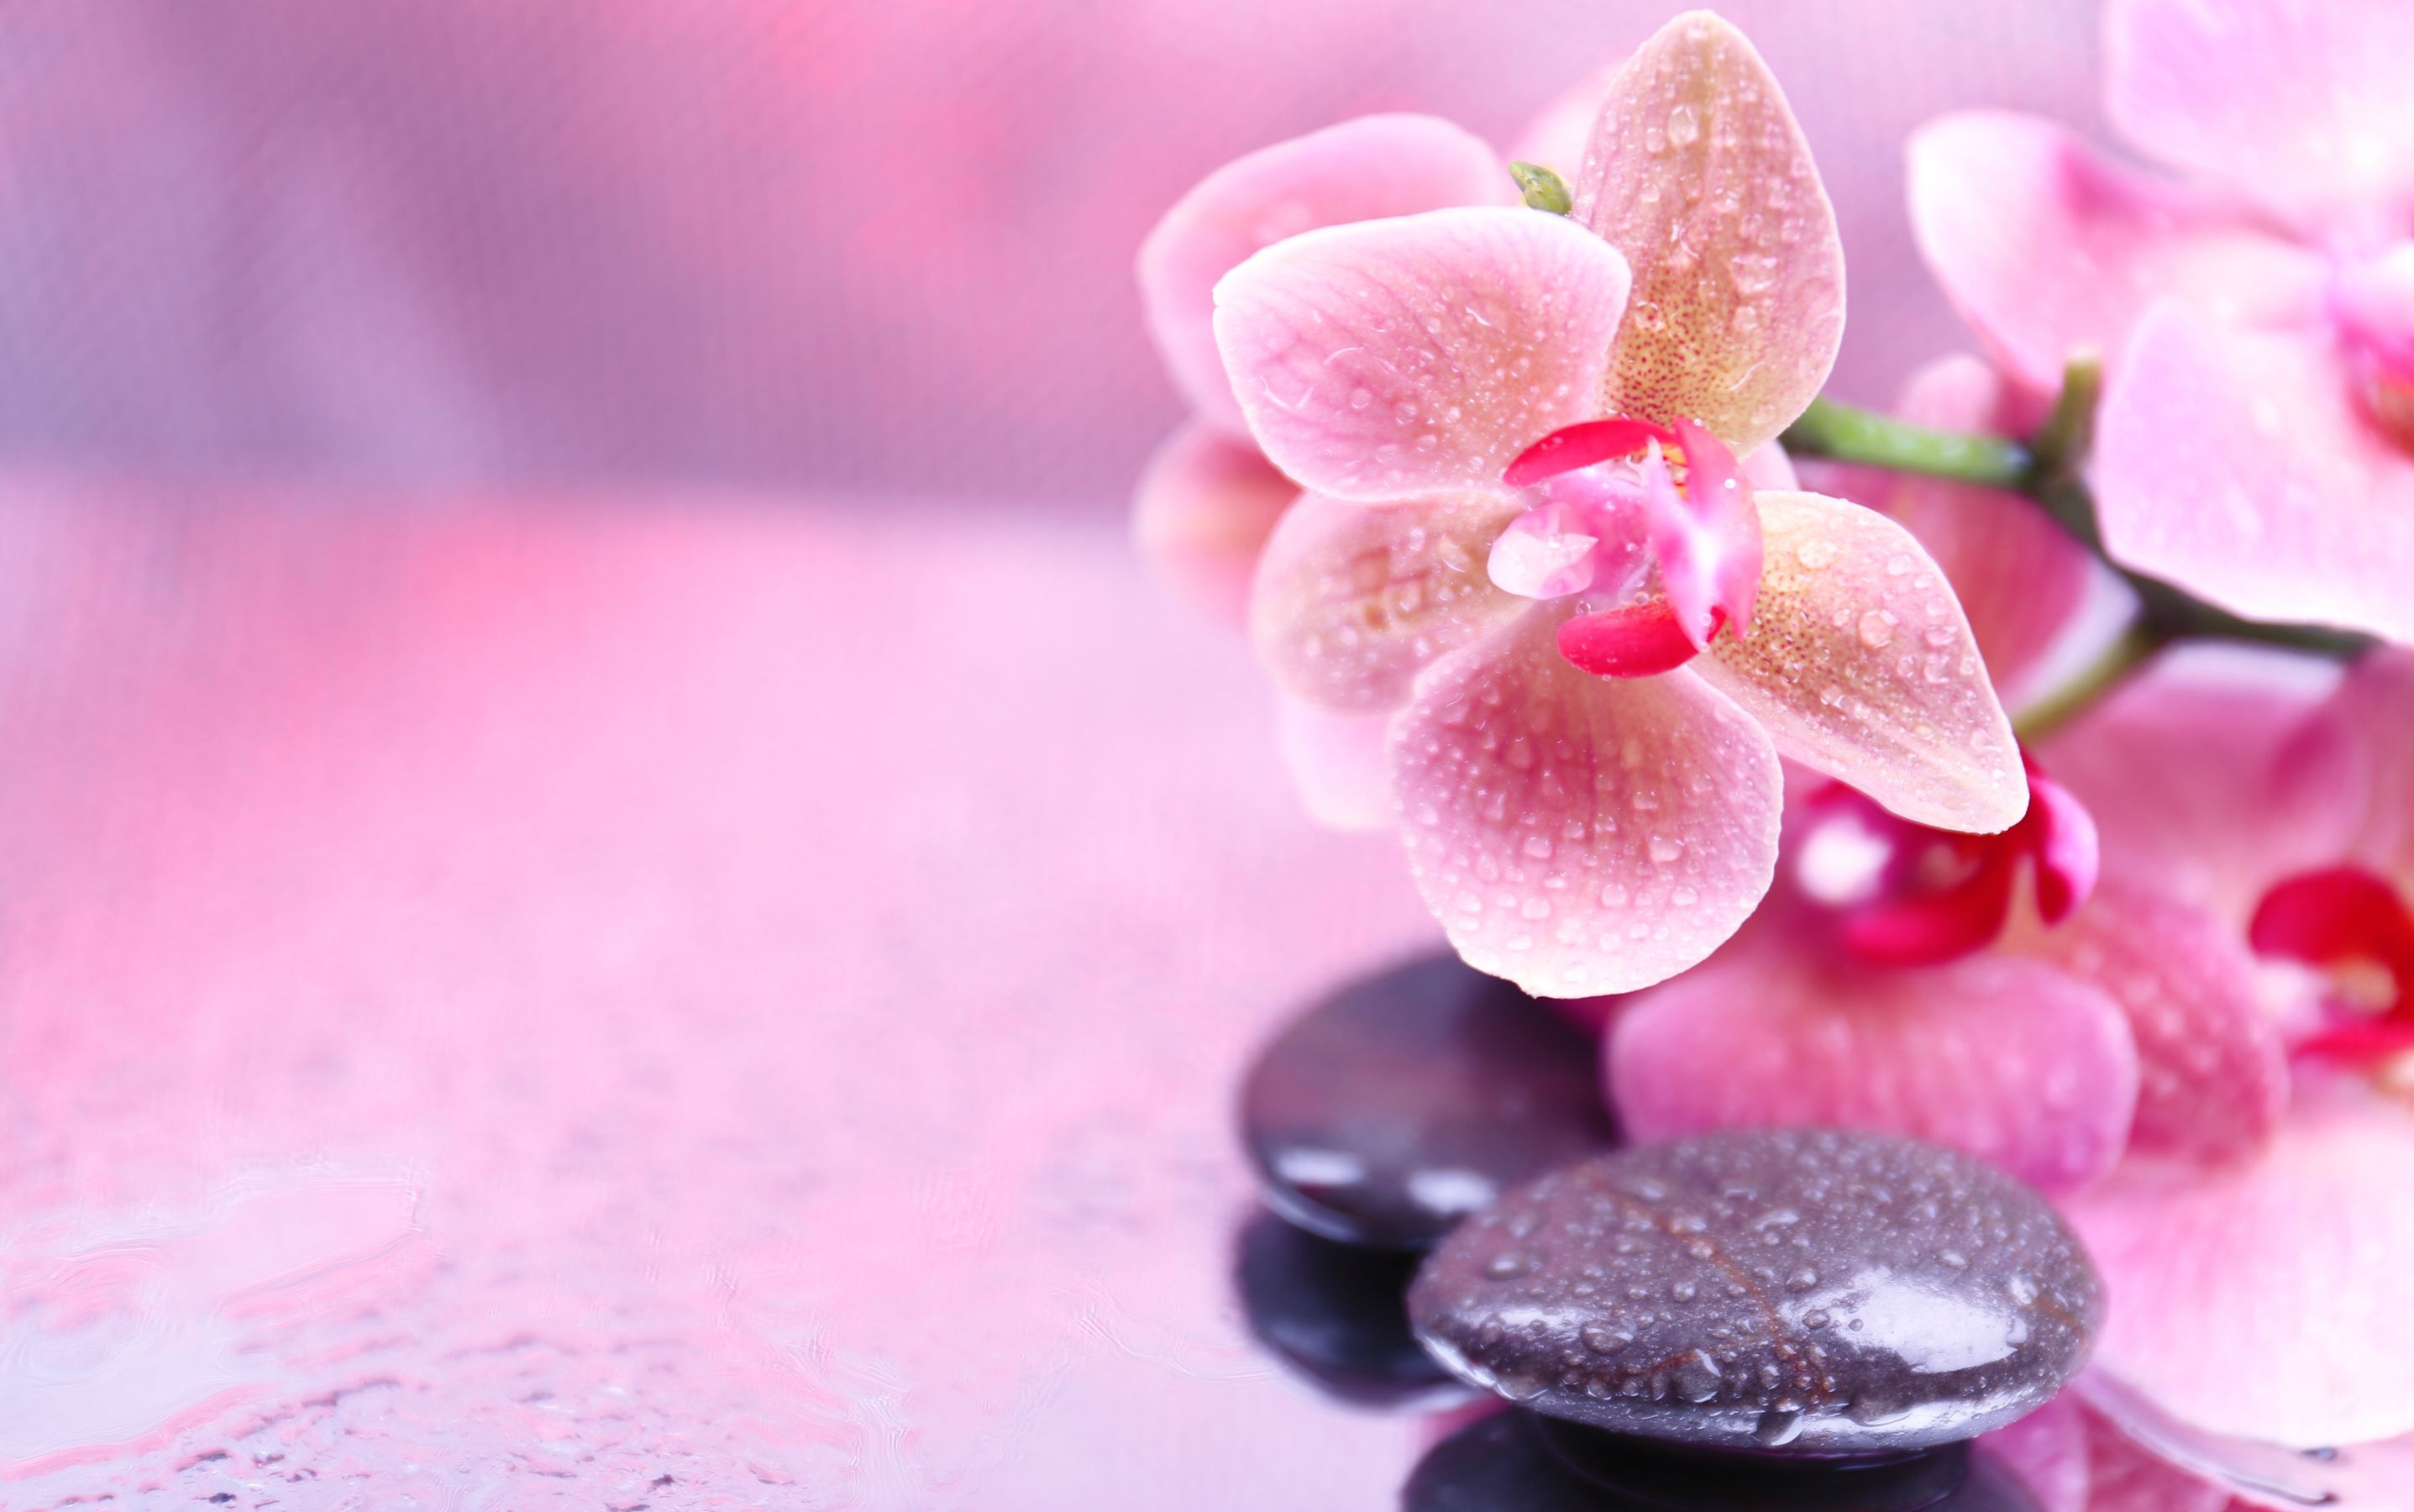 Pink Orchid Flower Wallpapers